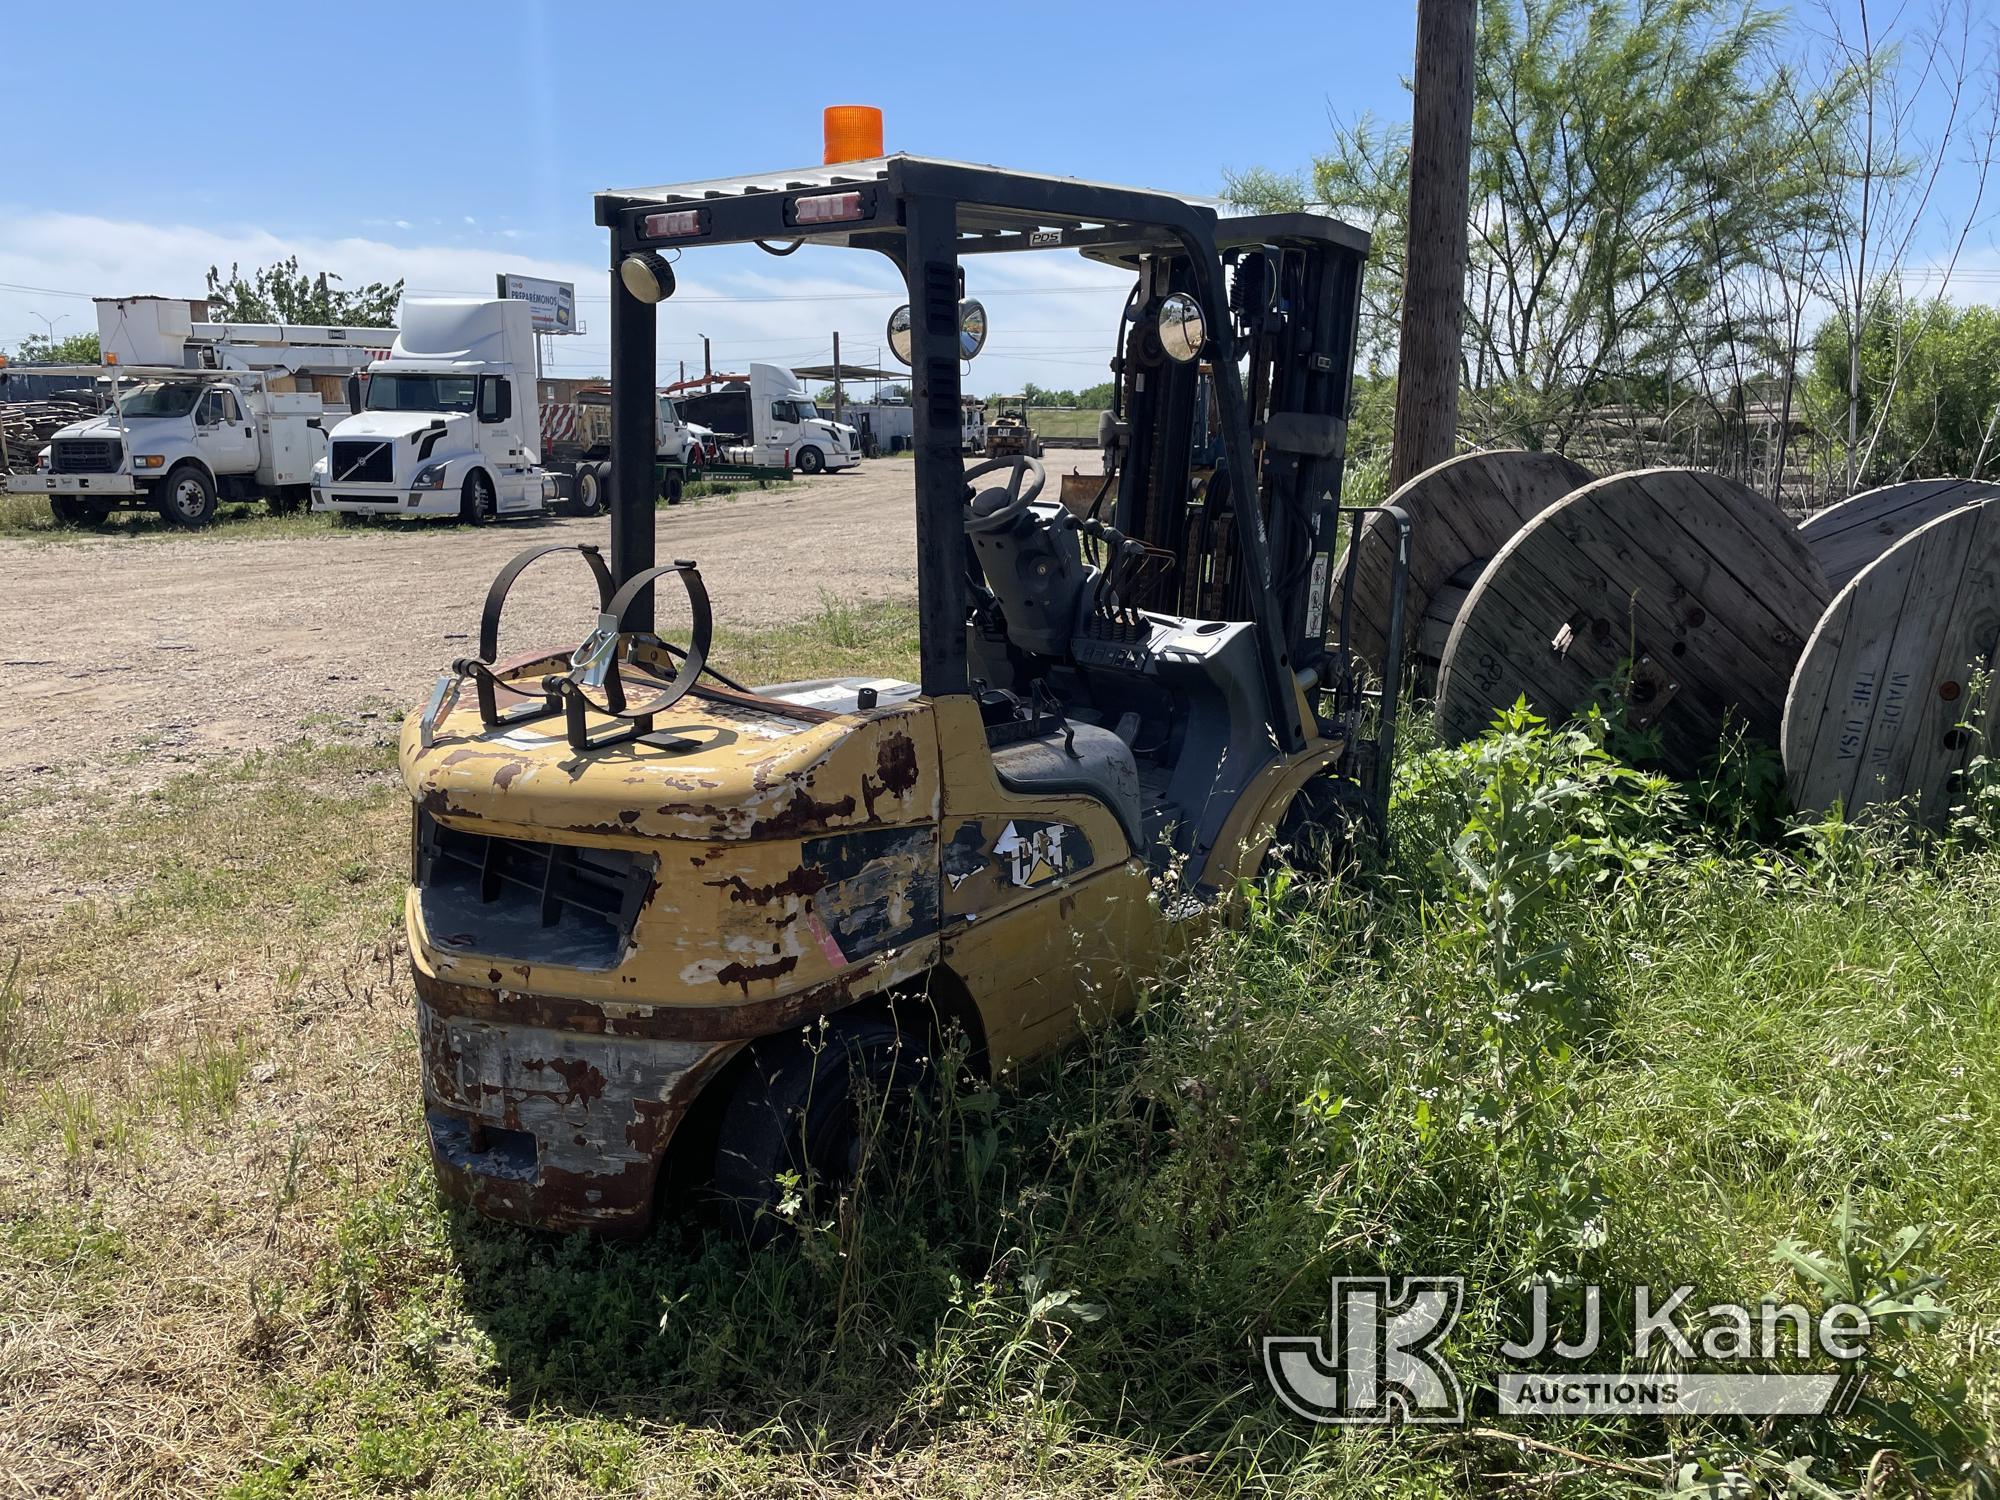 (San Antonio, TX) 2008 Caterpillar P60002 Solid Tired Forklift Not Running, Condition Unknown